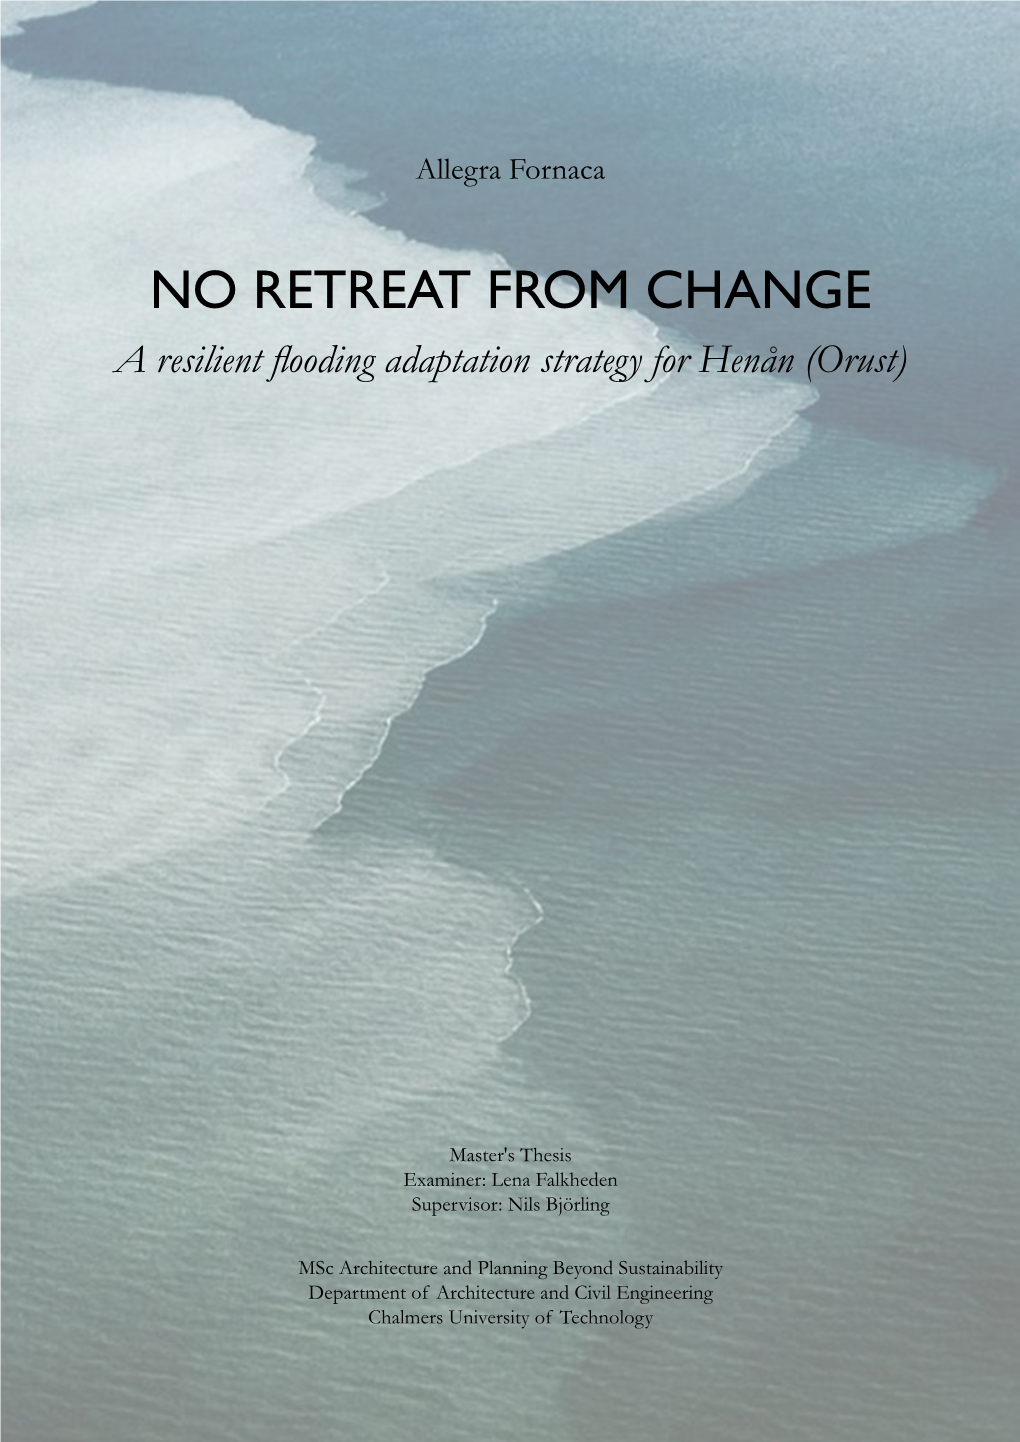 NO RETREAT from CHANGE a Resilient Flooding Adaptation Strategy for Henån (Orust)